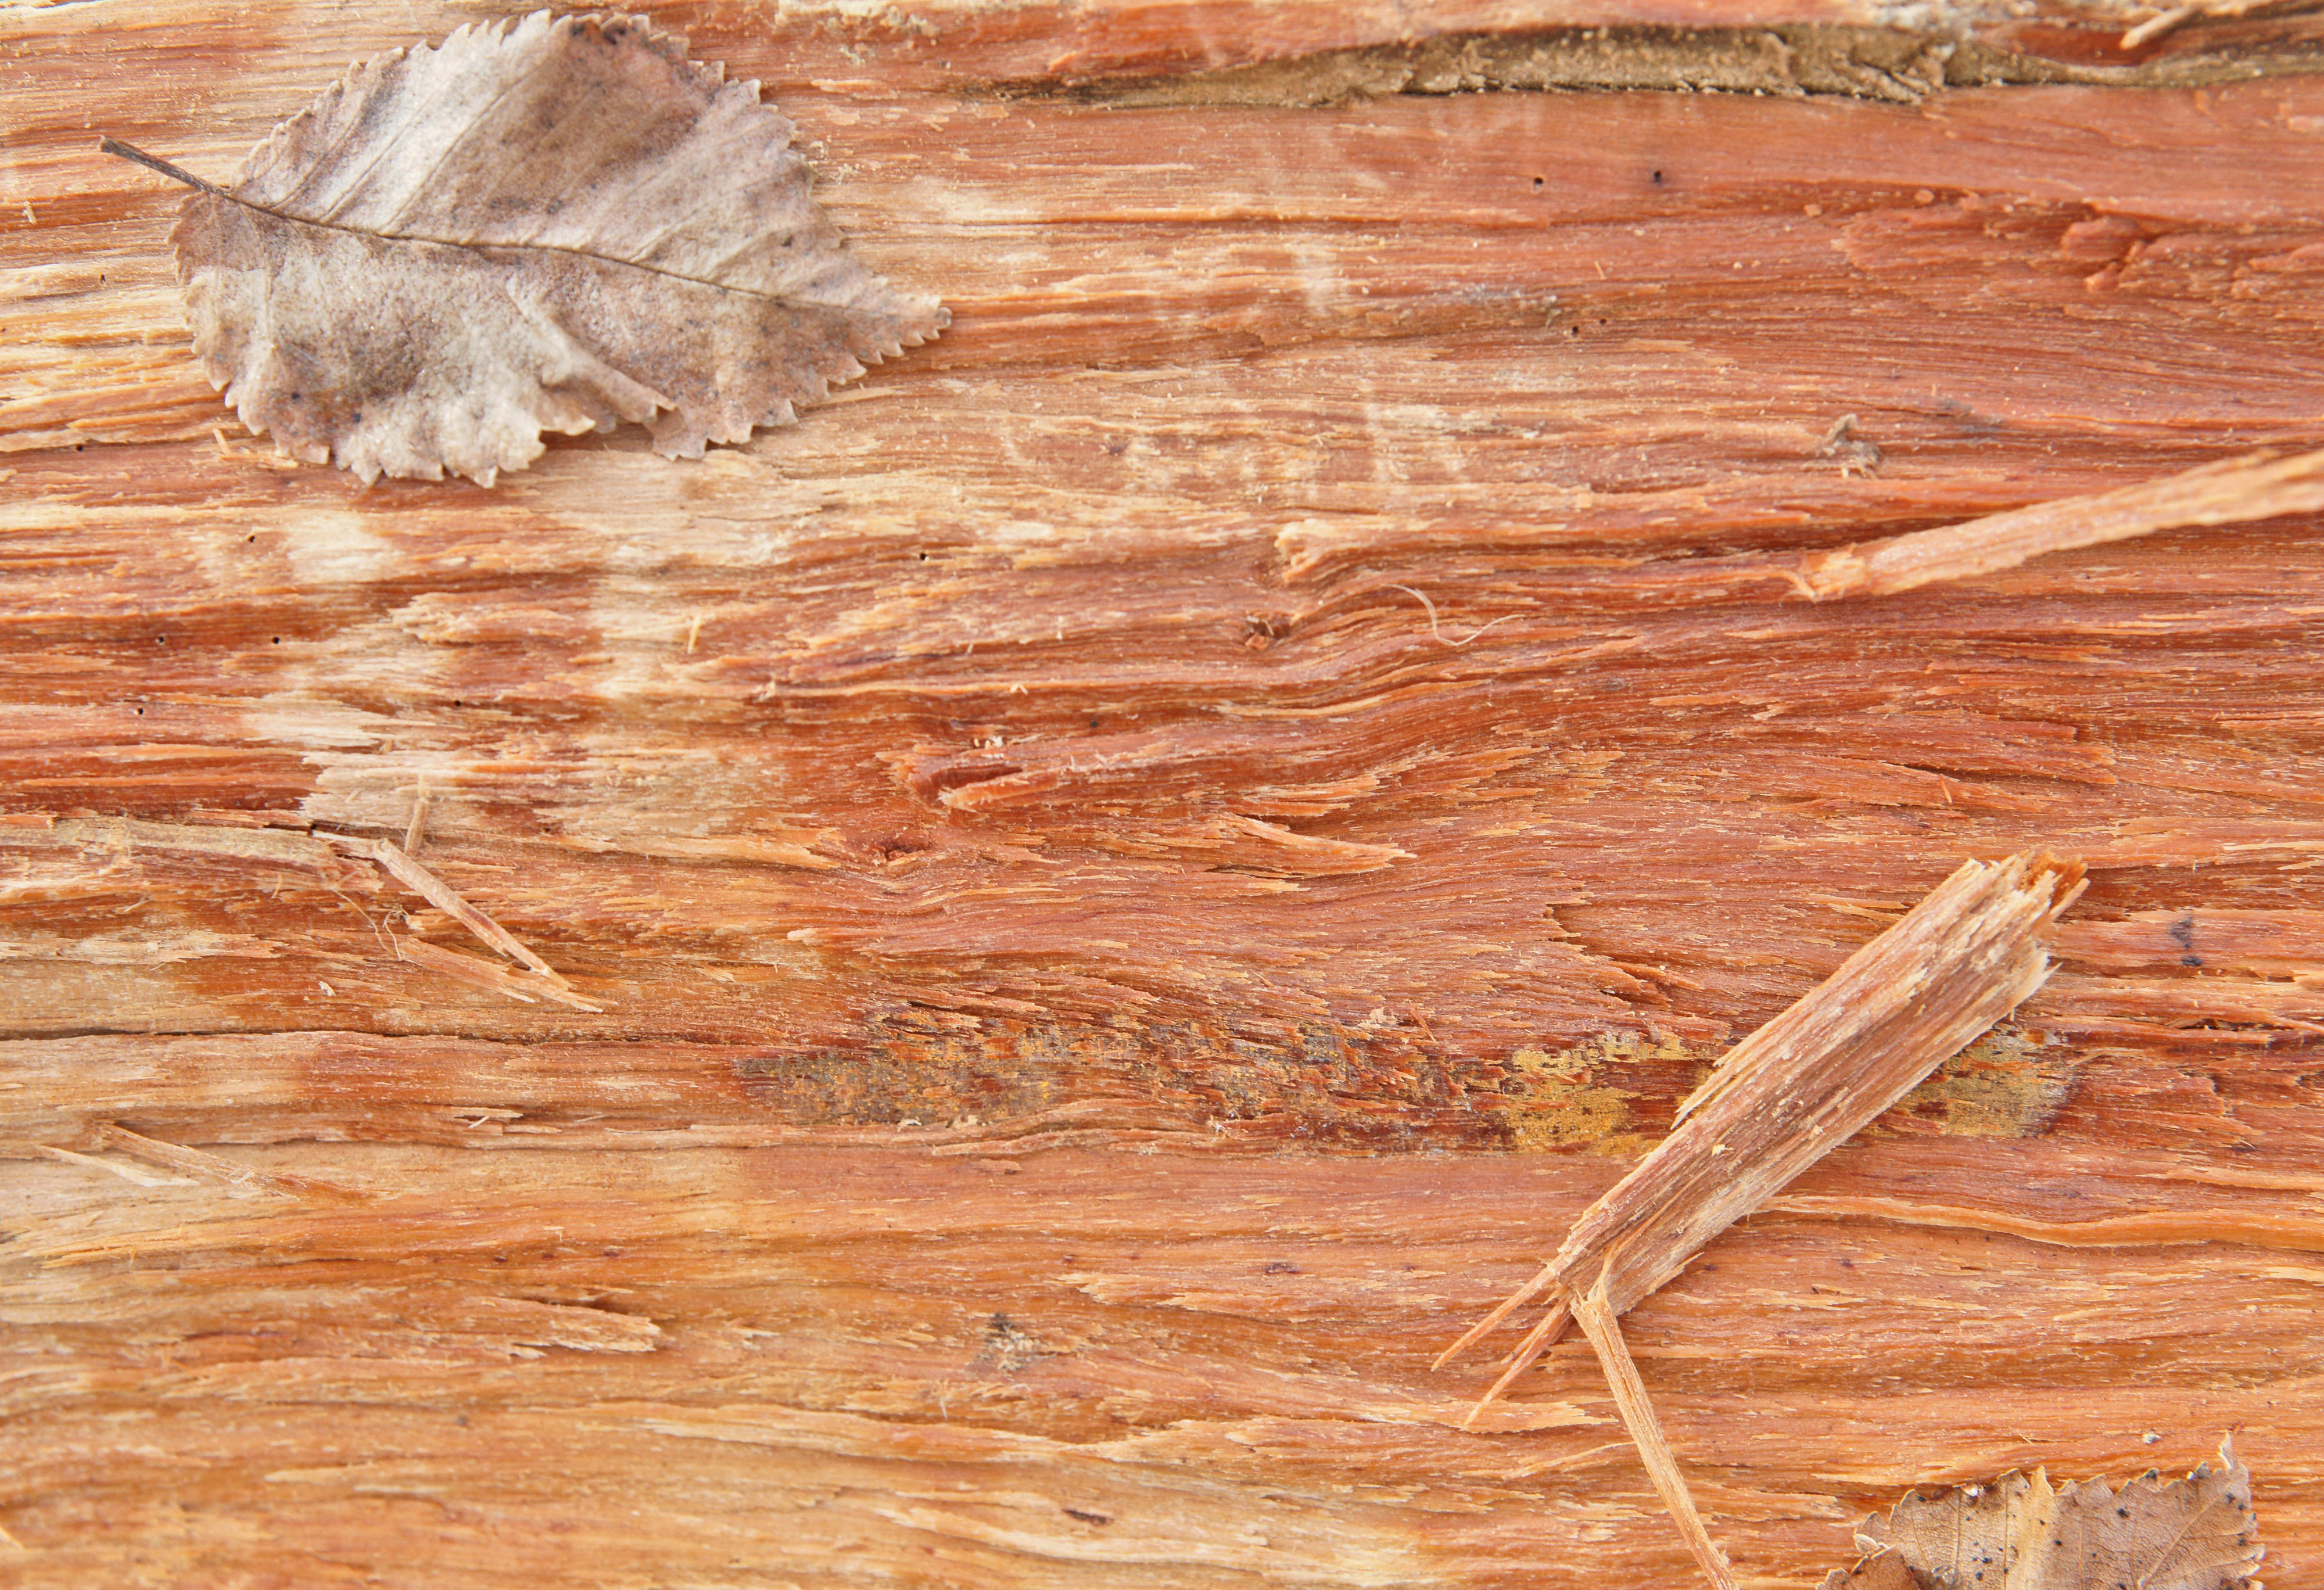 Three Image Of A Cut Log For Wooden Textures Or Wood Background